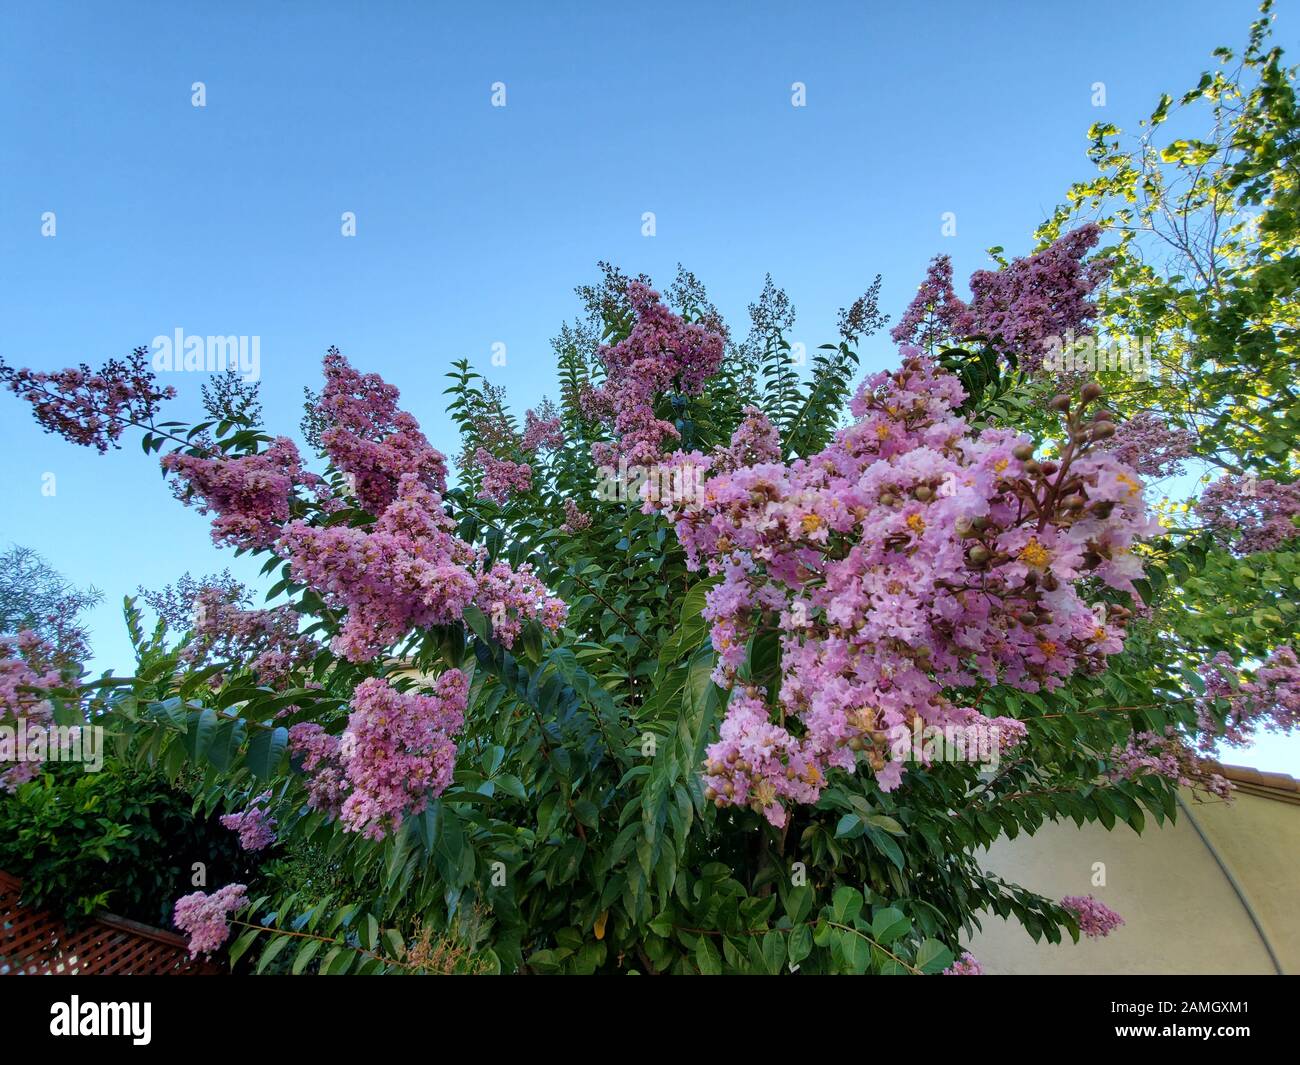 Close-up of a flowering crape myrtle (Lagerstroemia) tree in San Ramon, California, August 14, 2019. () Stock Photo